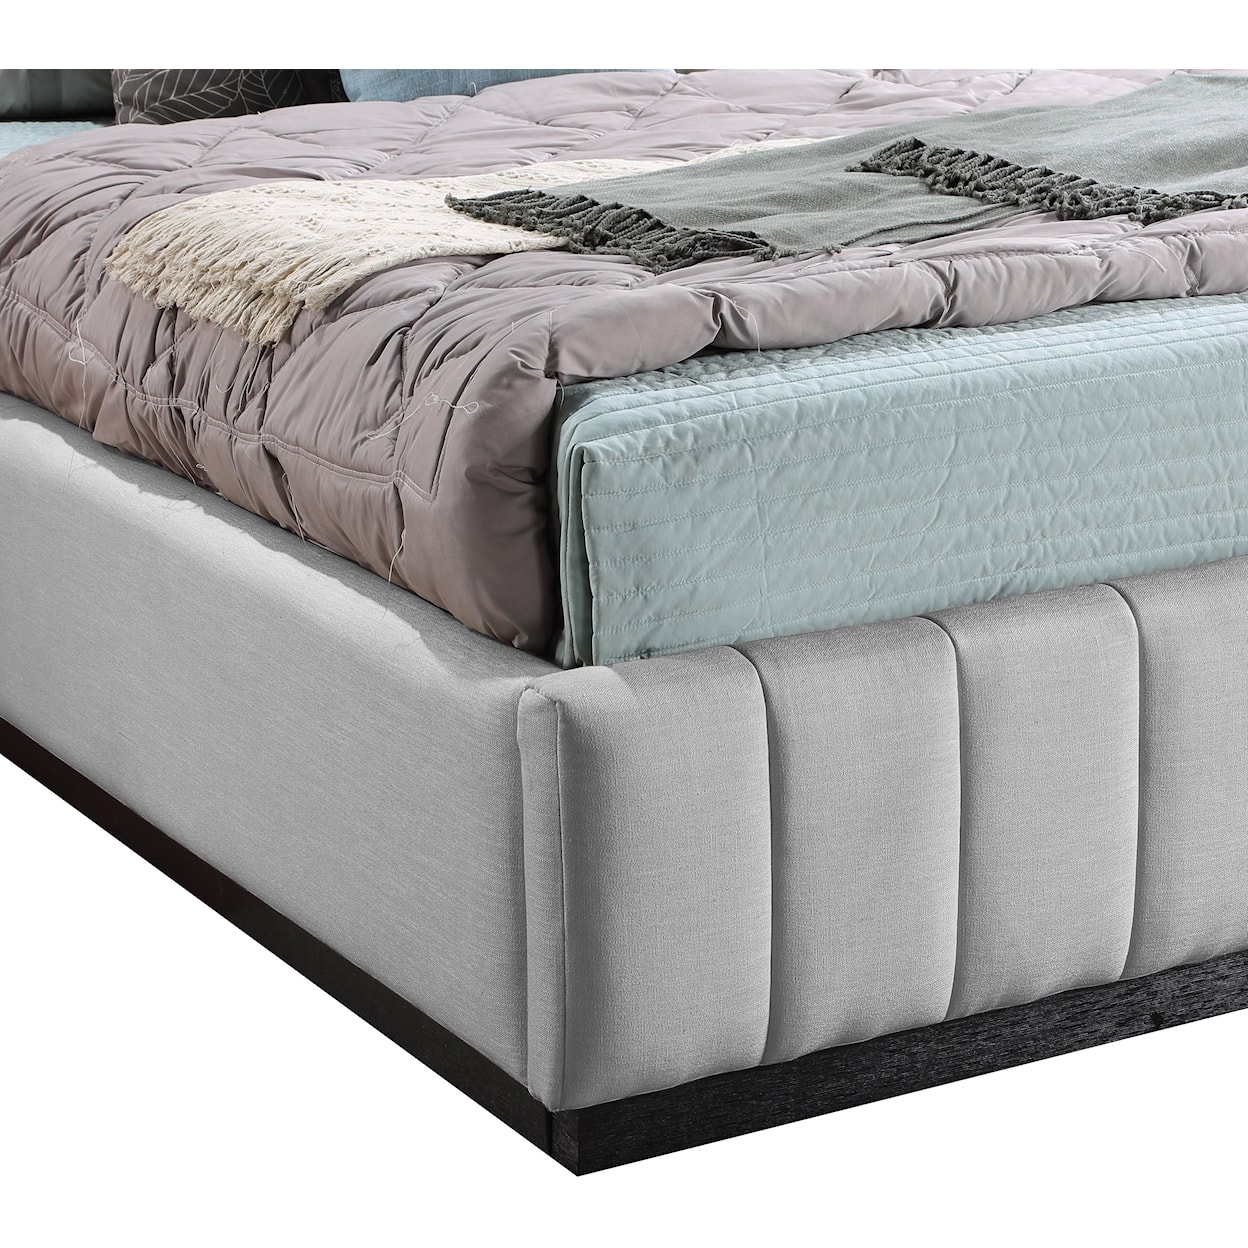 Meridian Furniture Lucia Full Bed